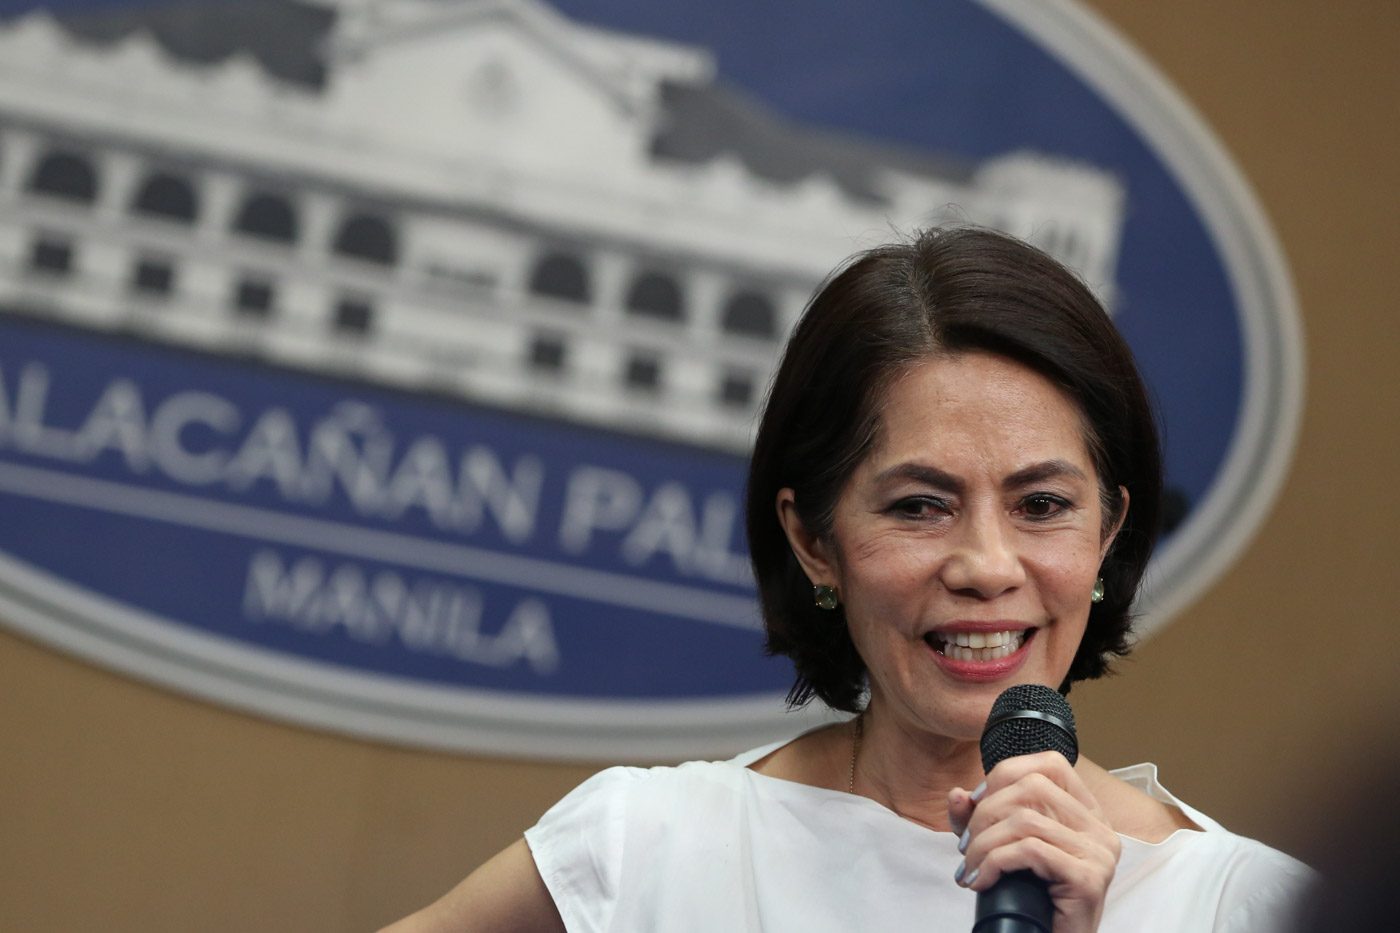 DENR to reopen mining firms closed by Gina Lopez